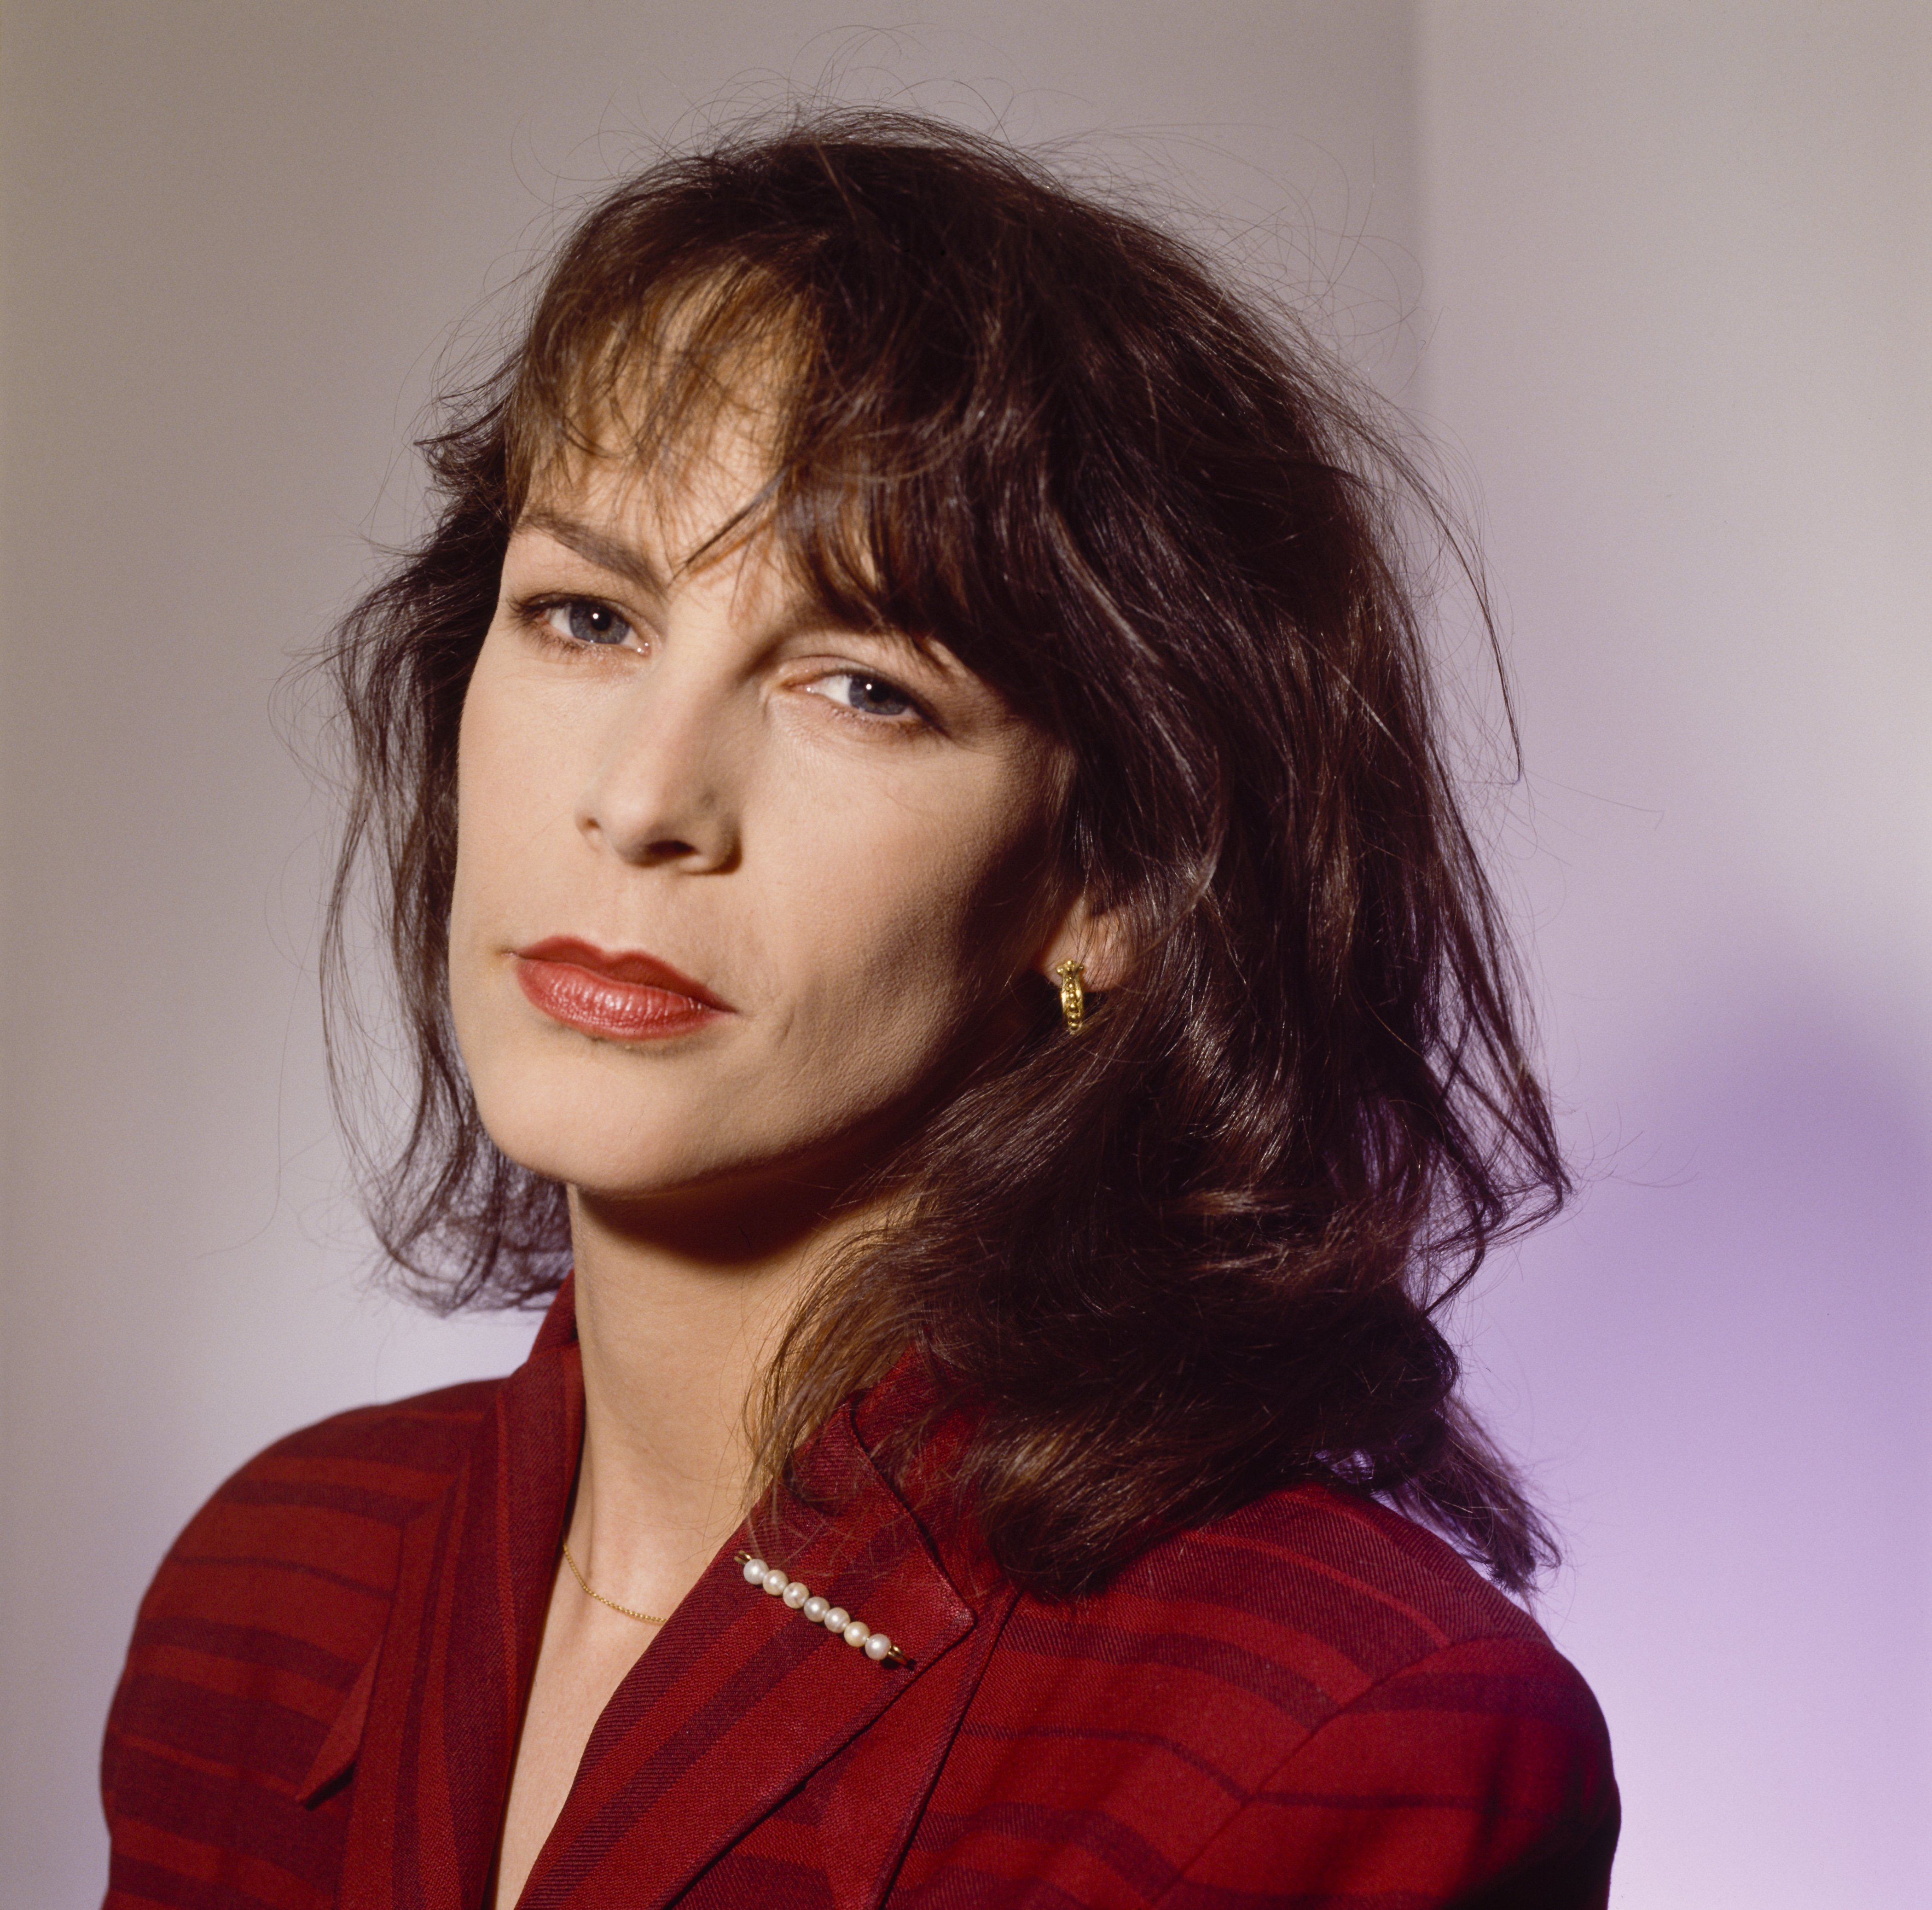 Jamie Lee Curtis sporting longer and darker hair, circa 1985. | Source: Getty Images